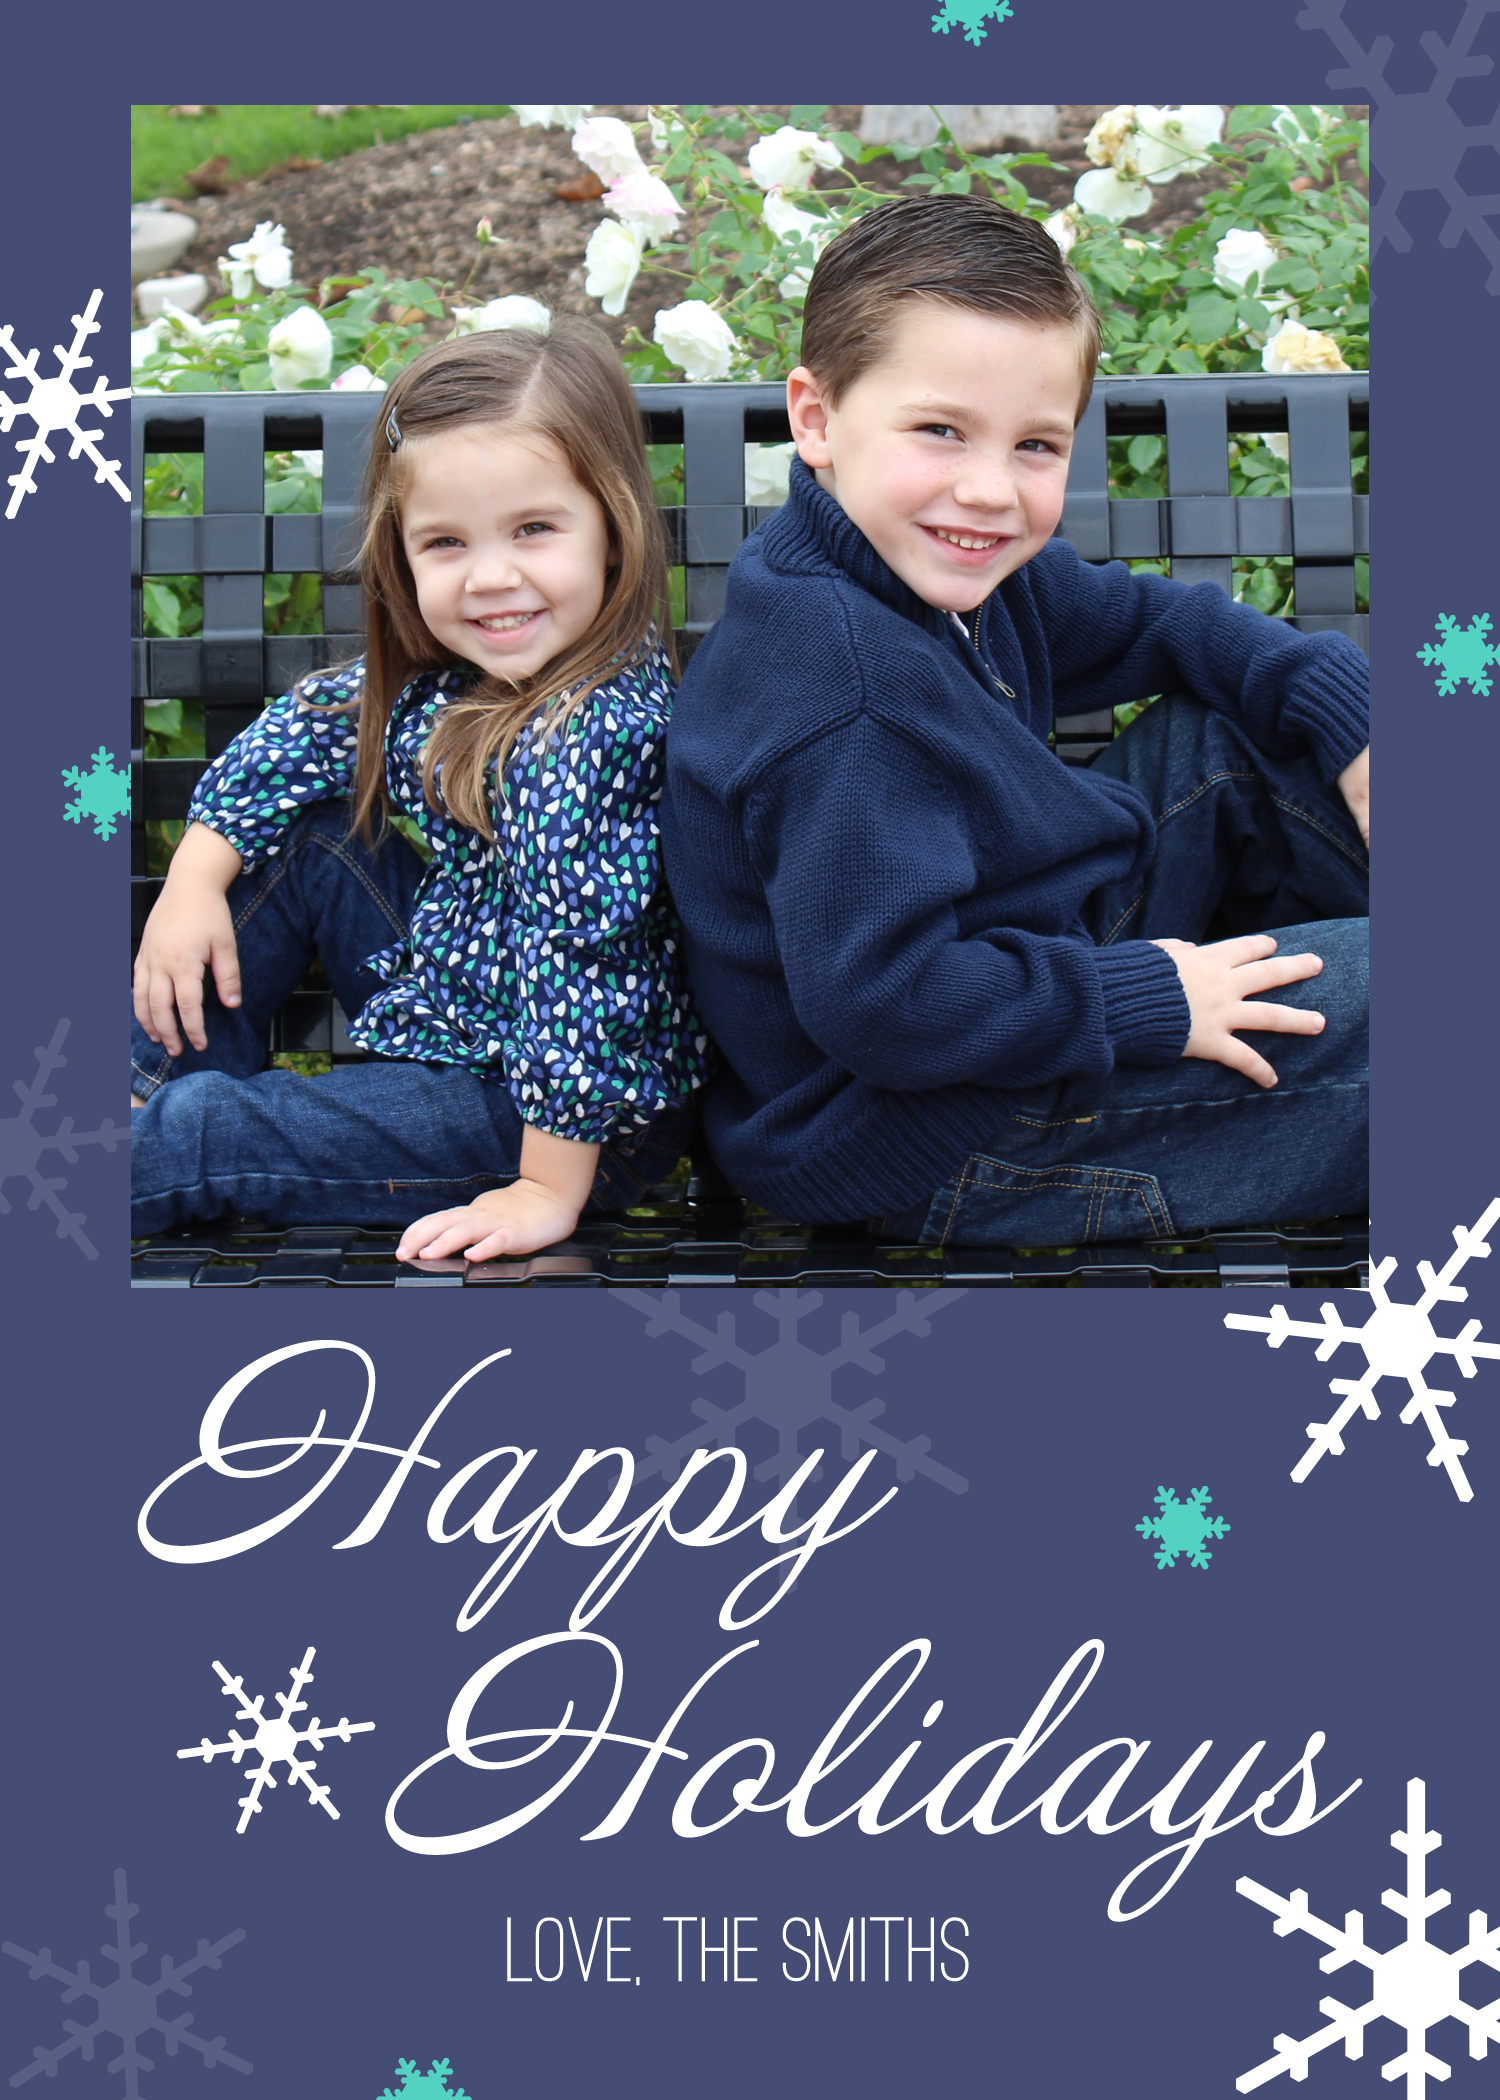 Holiday Photo Card & Pixlr Video Tutorial – Designer Blogs With Free Holiday Photo Card Templates